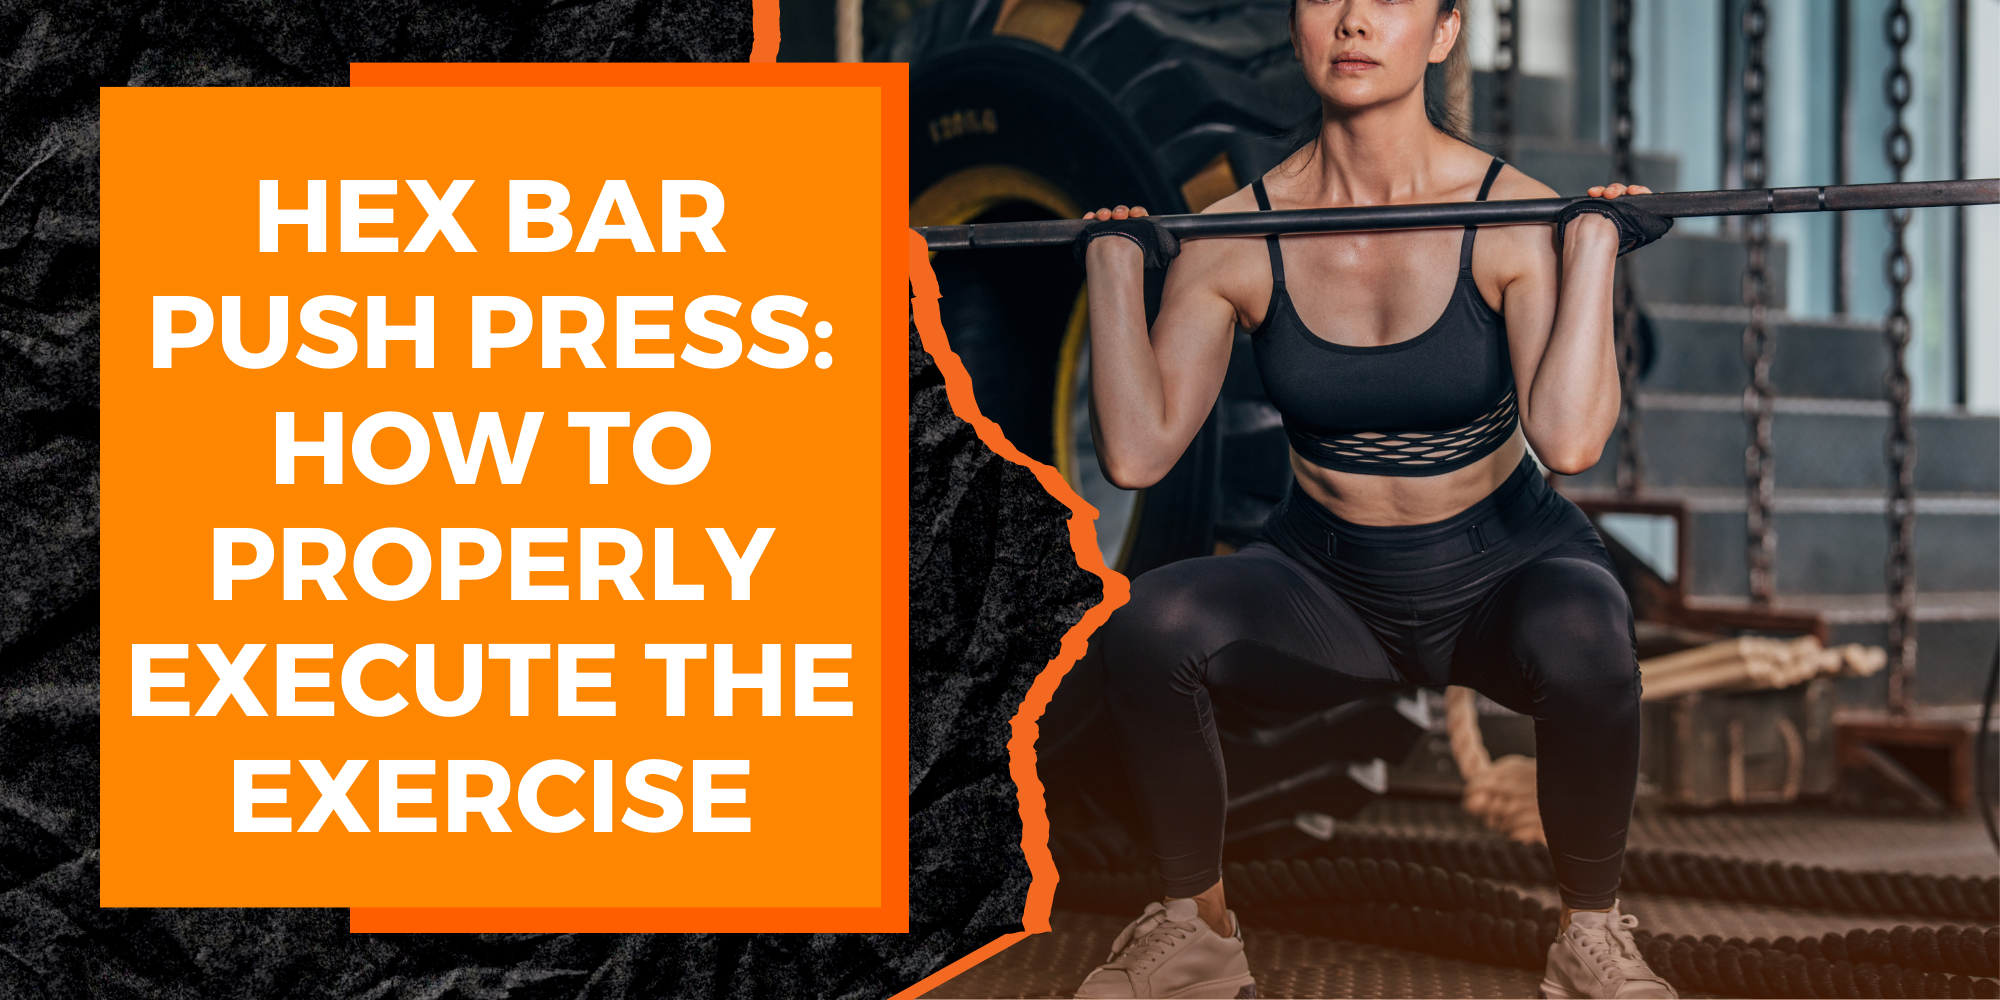 Hex Bar Push Press: How to Properly Execute the Exercise